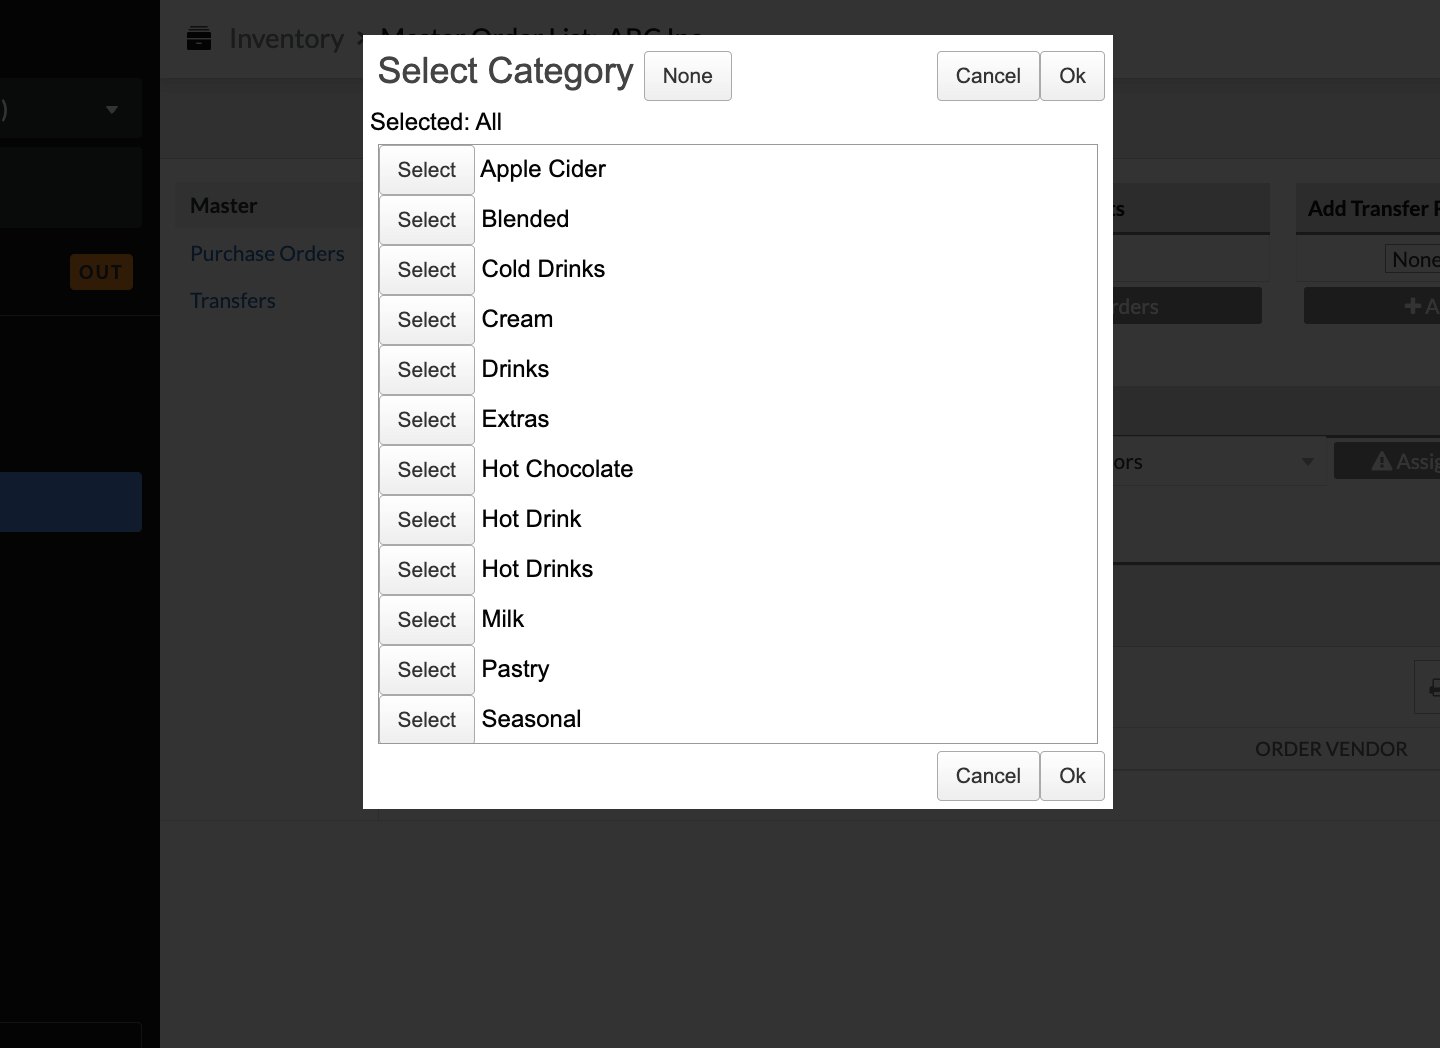 Pop-up window with list of available categories.